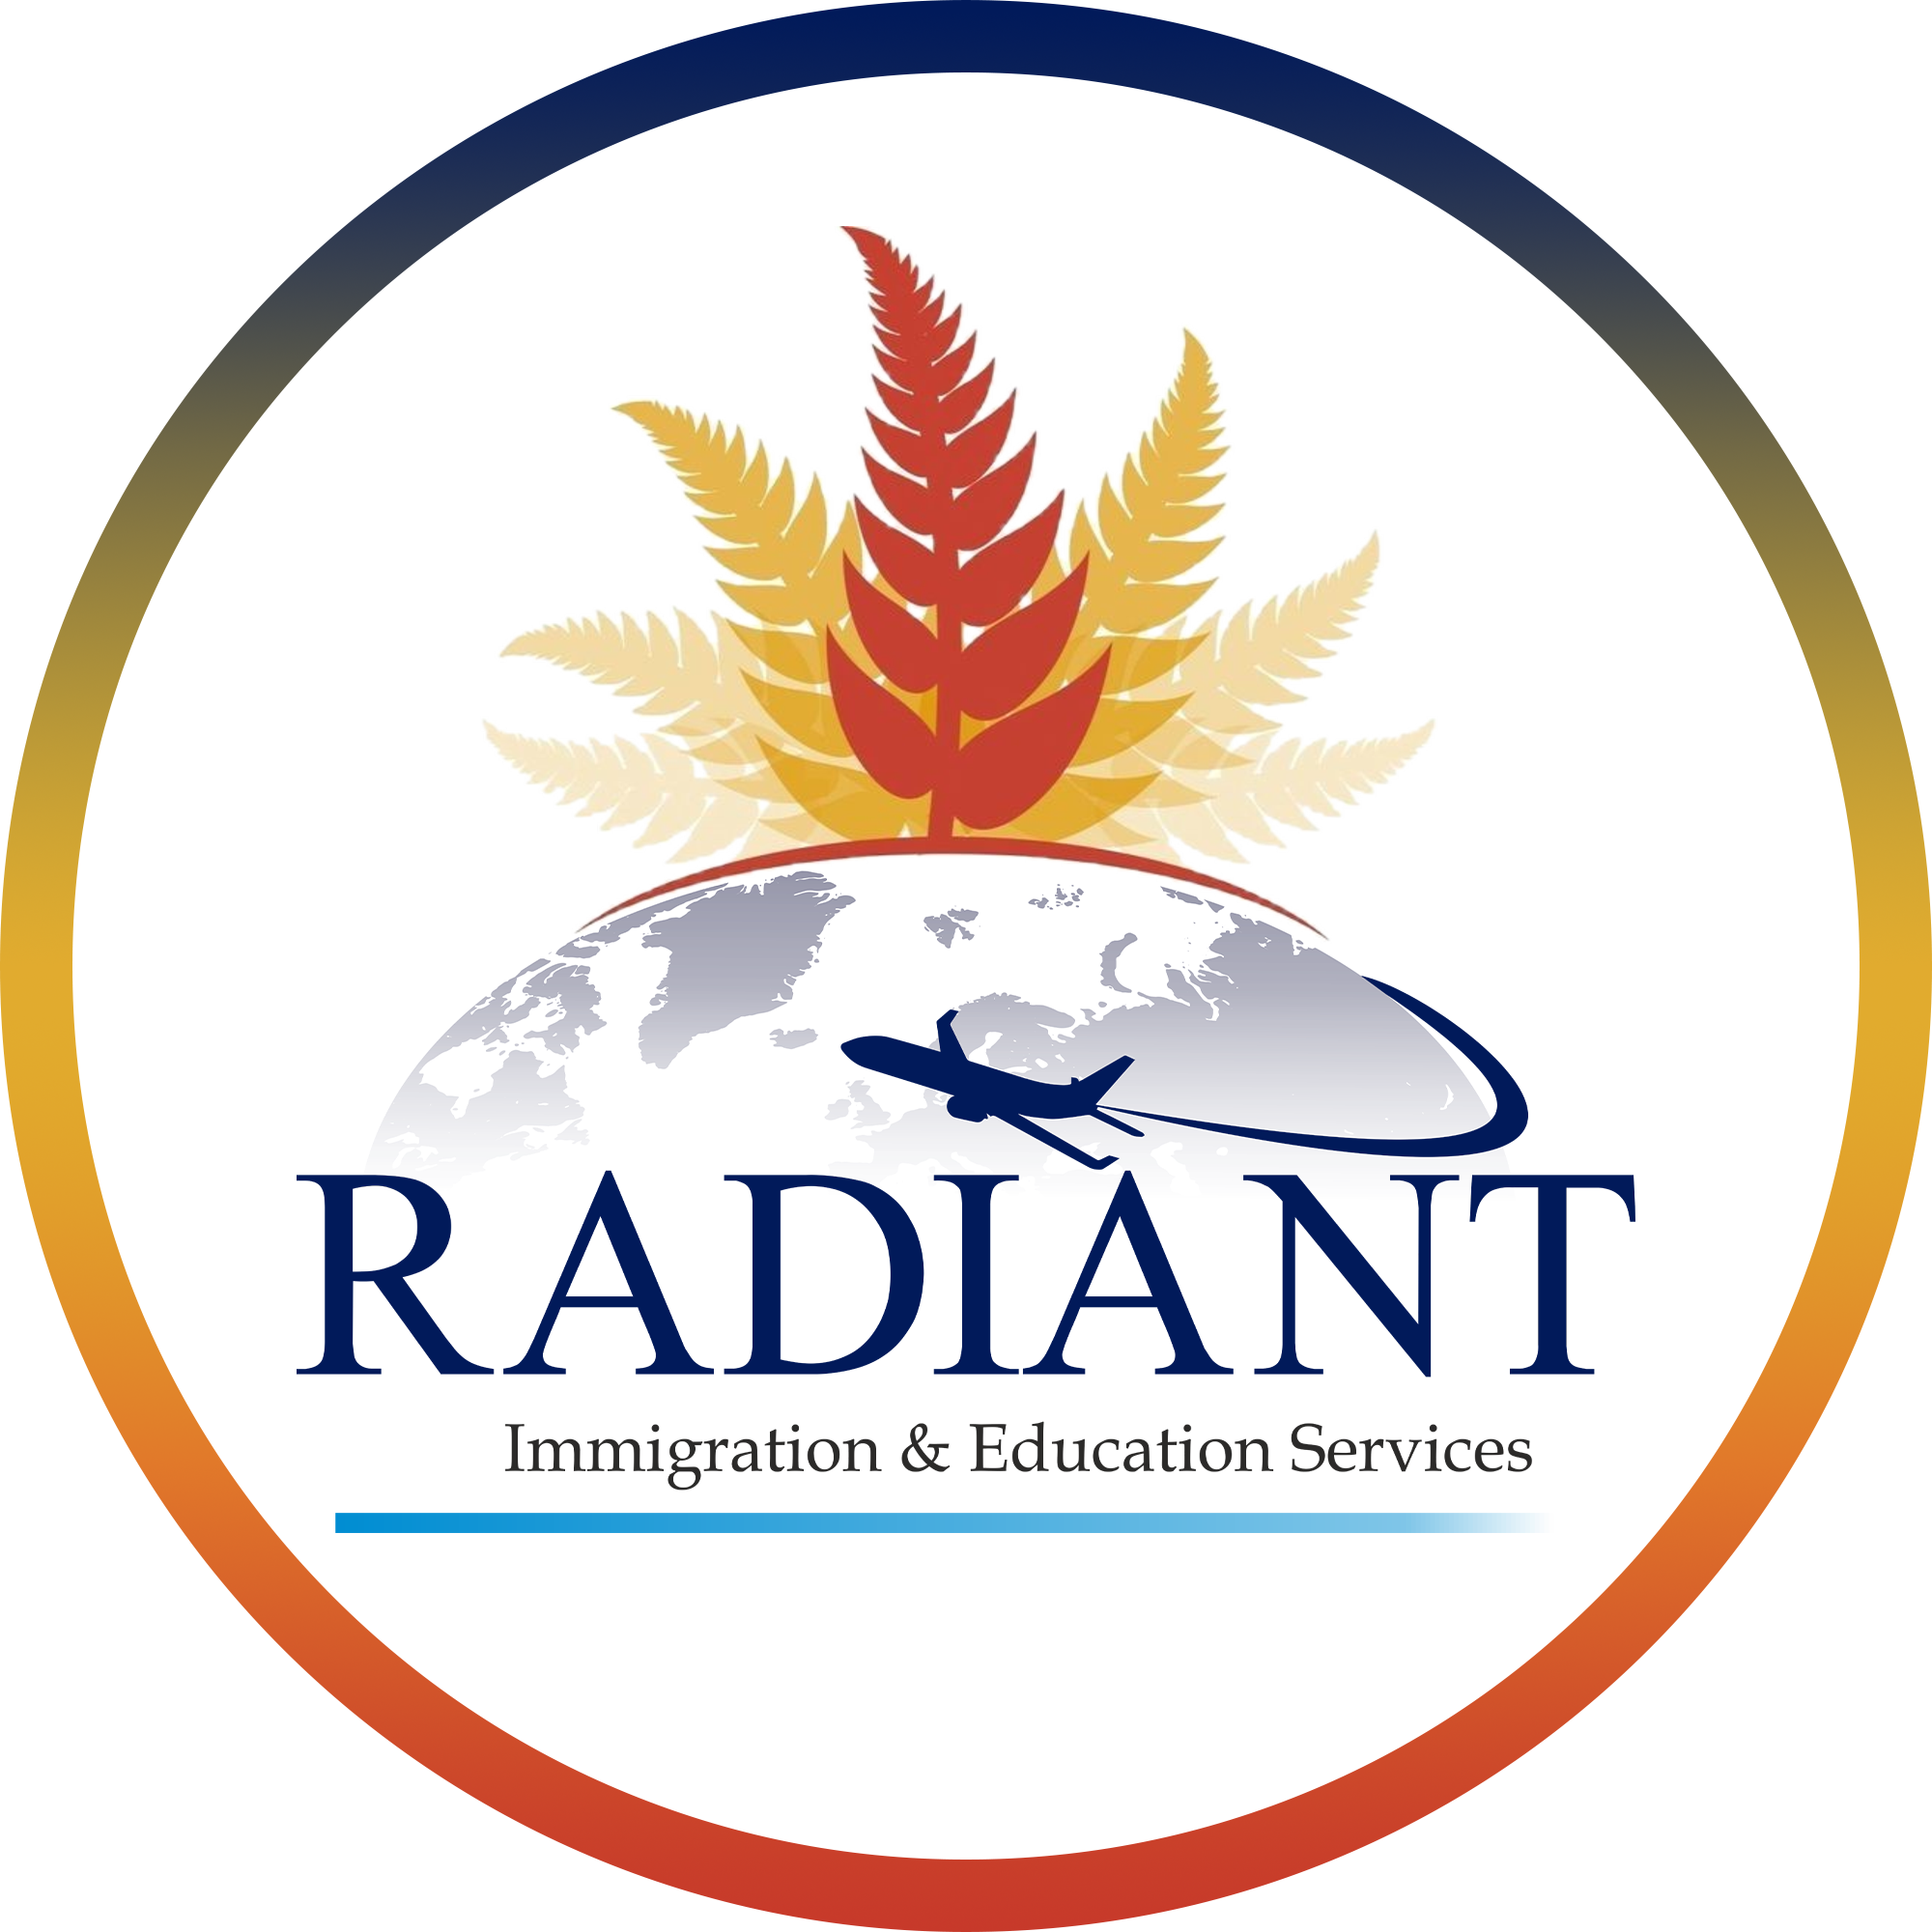 Radiant Immigration & Education Services Logo